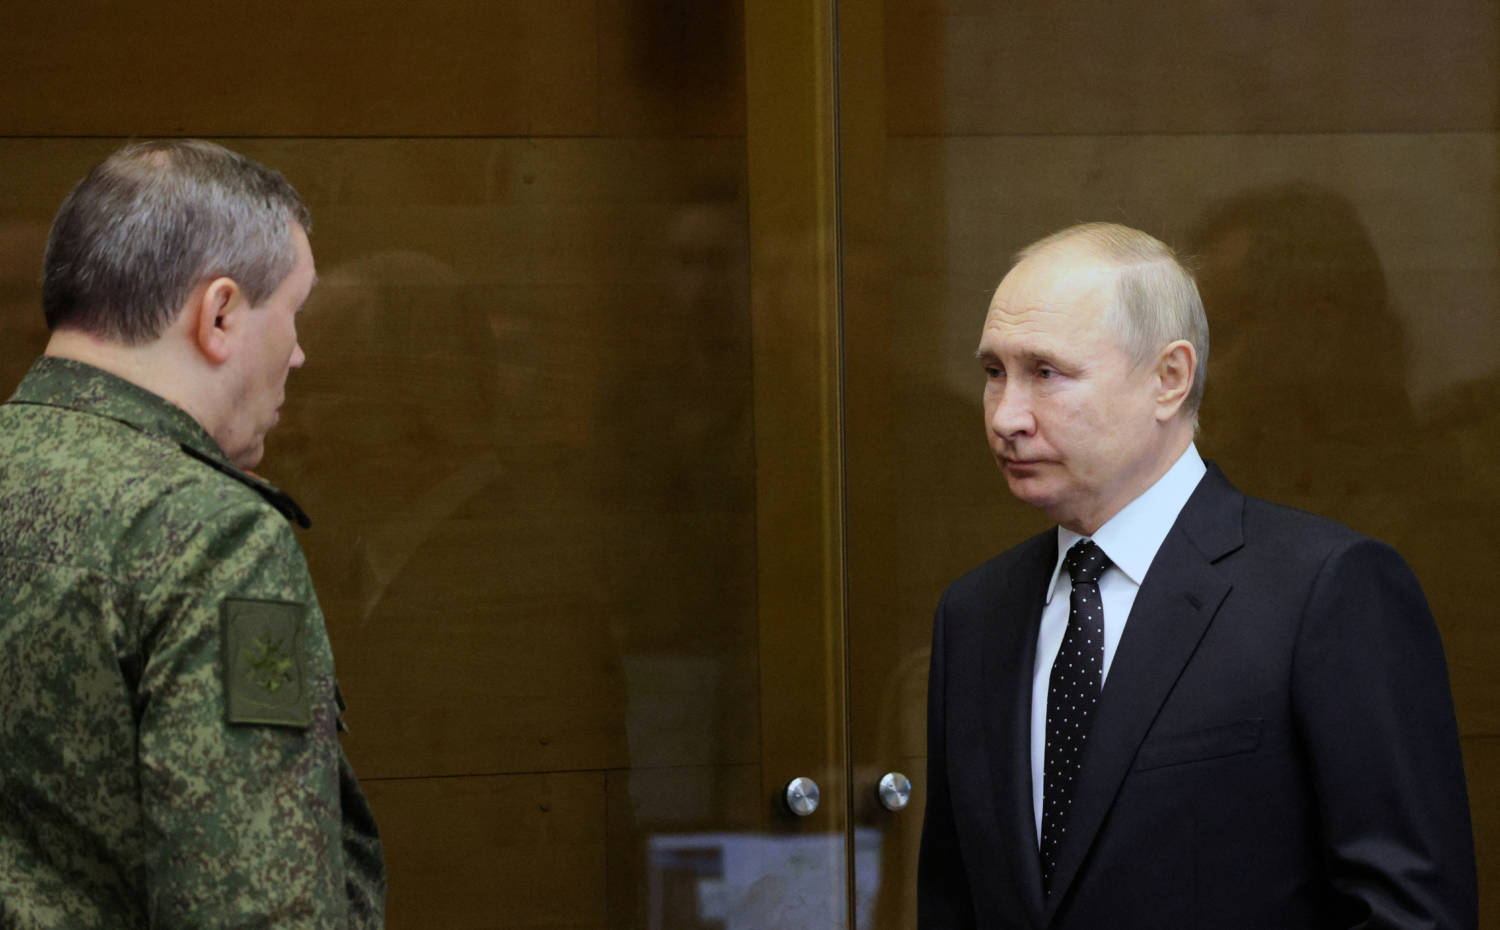 Russian President Vladimir Putin Visits The Joint Headquarters Of The Russian Armed Forces, In An Unknown Location